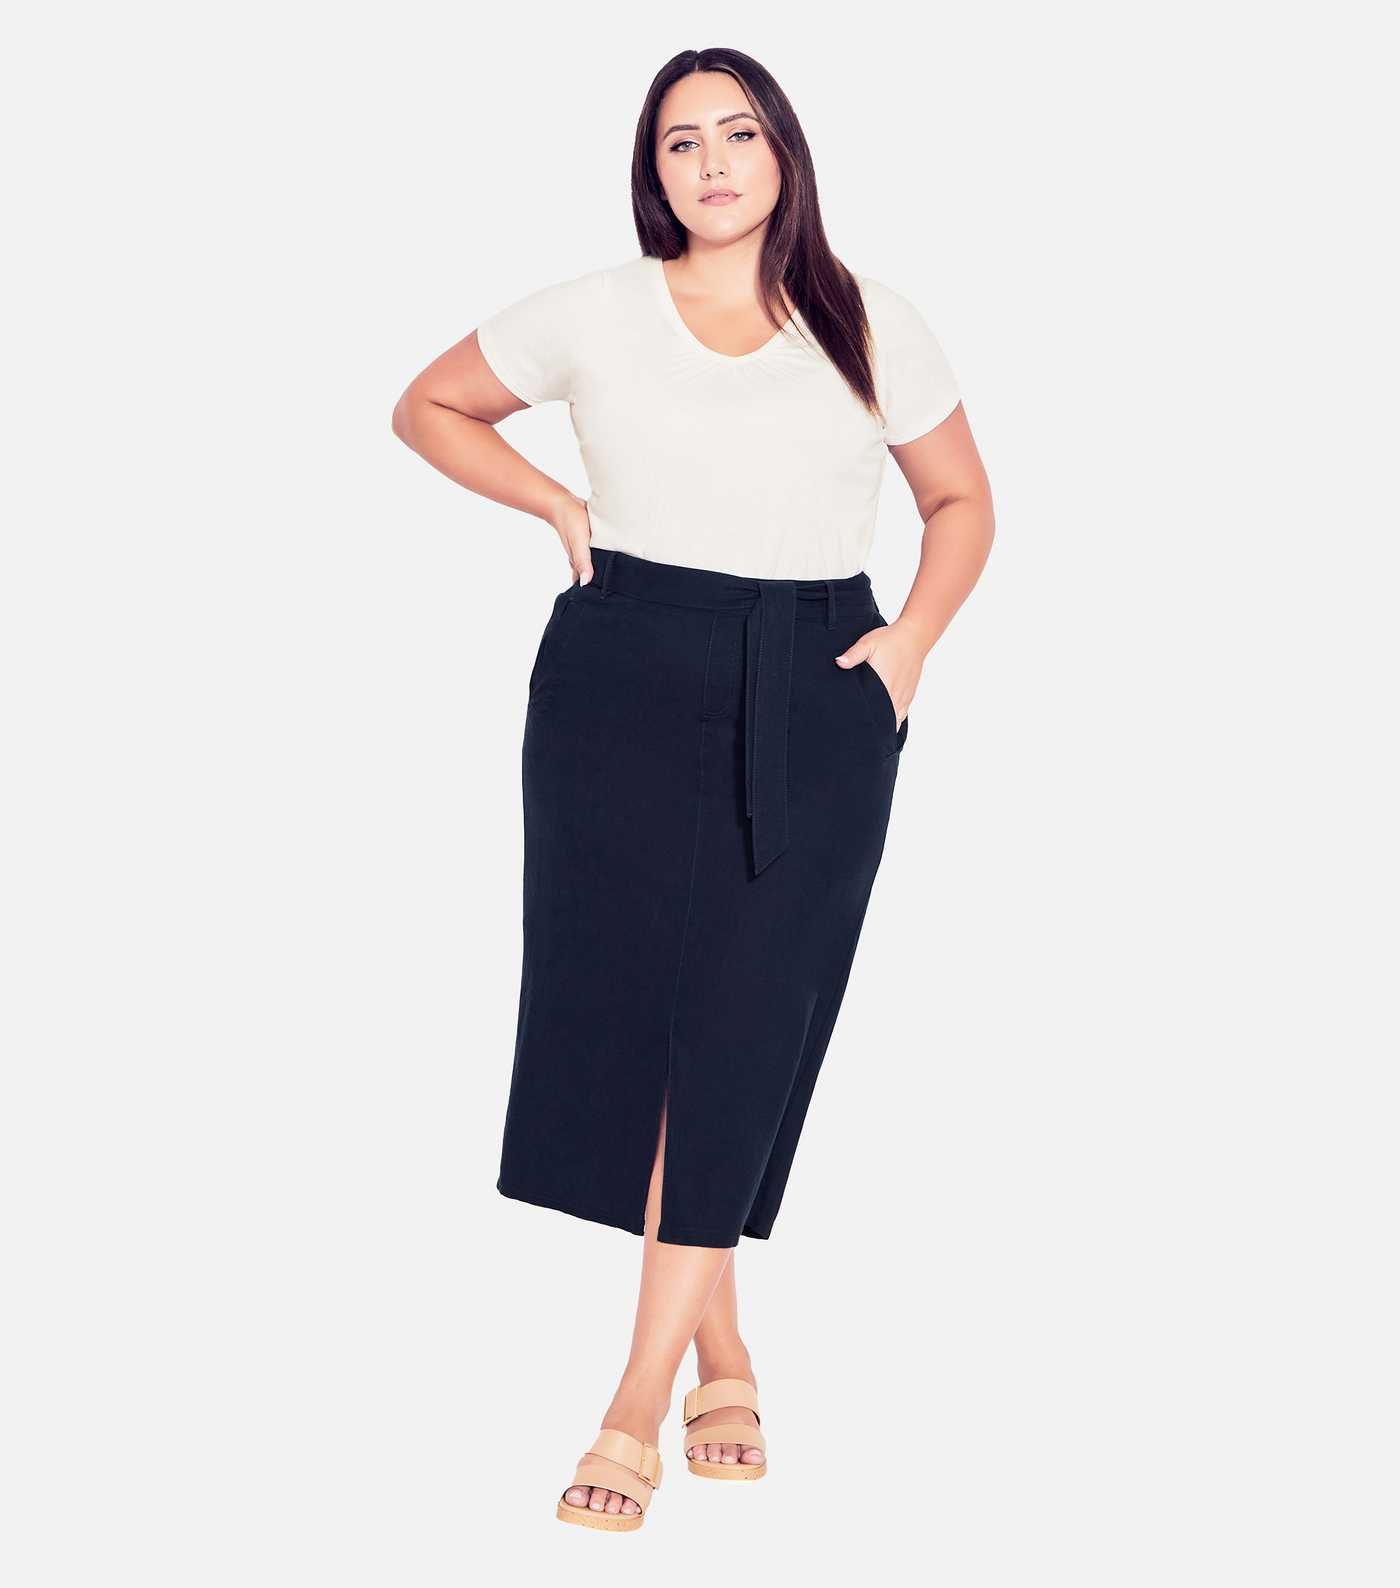 Evans Curves Navy Linen Blend Midi Skirt
						
						Add to Saved Items
						Remove from Saved ... | New Look (UK)